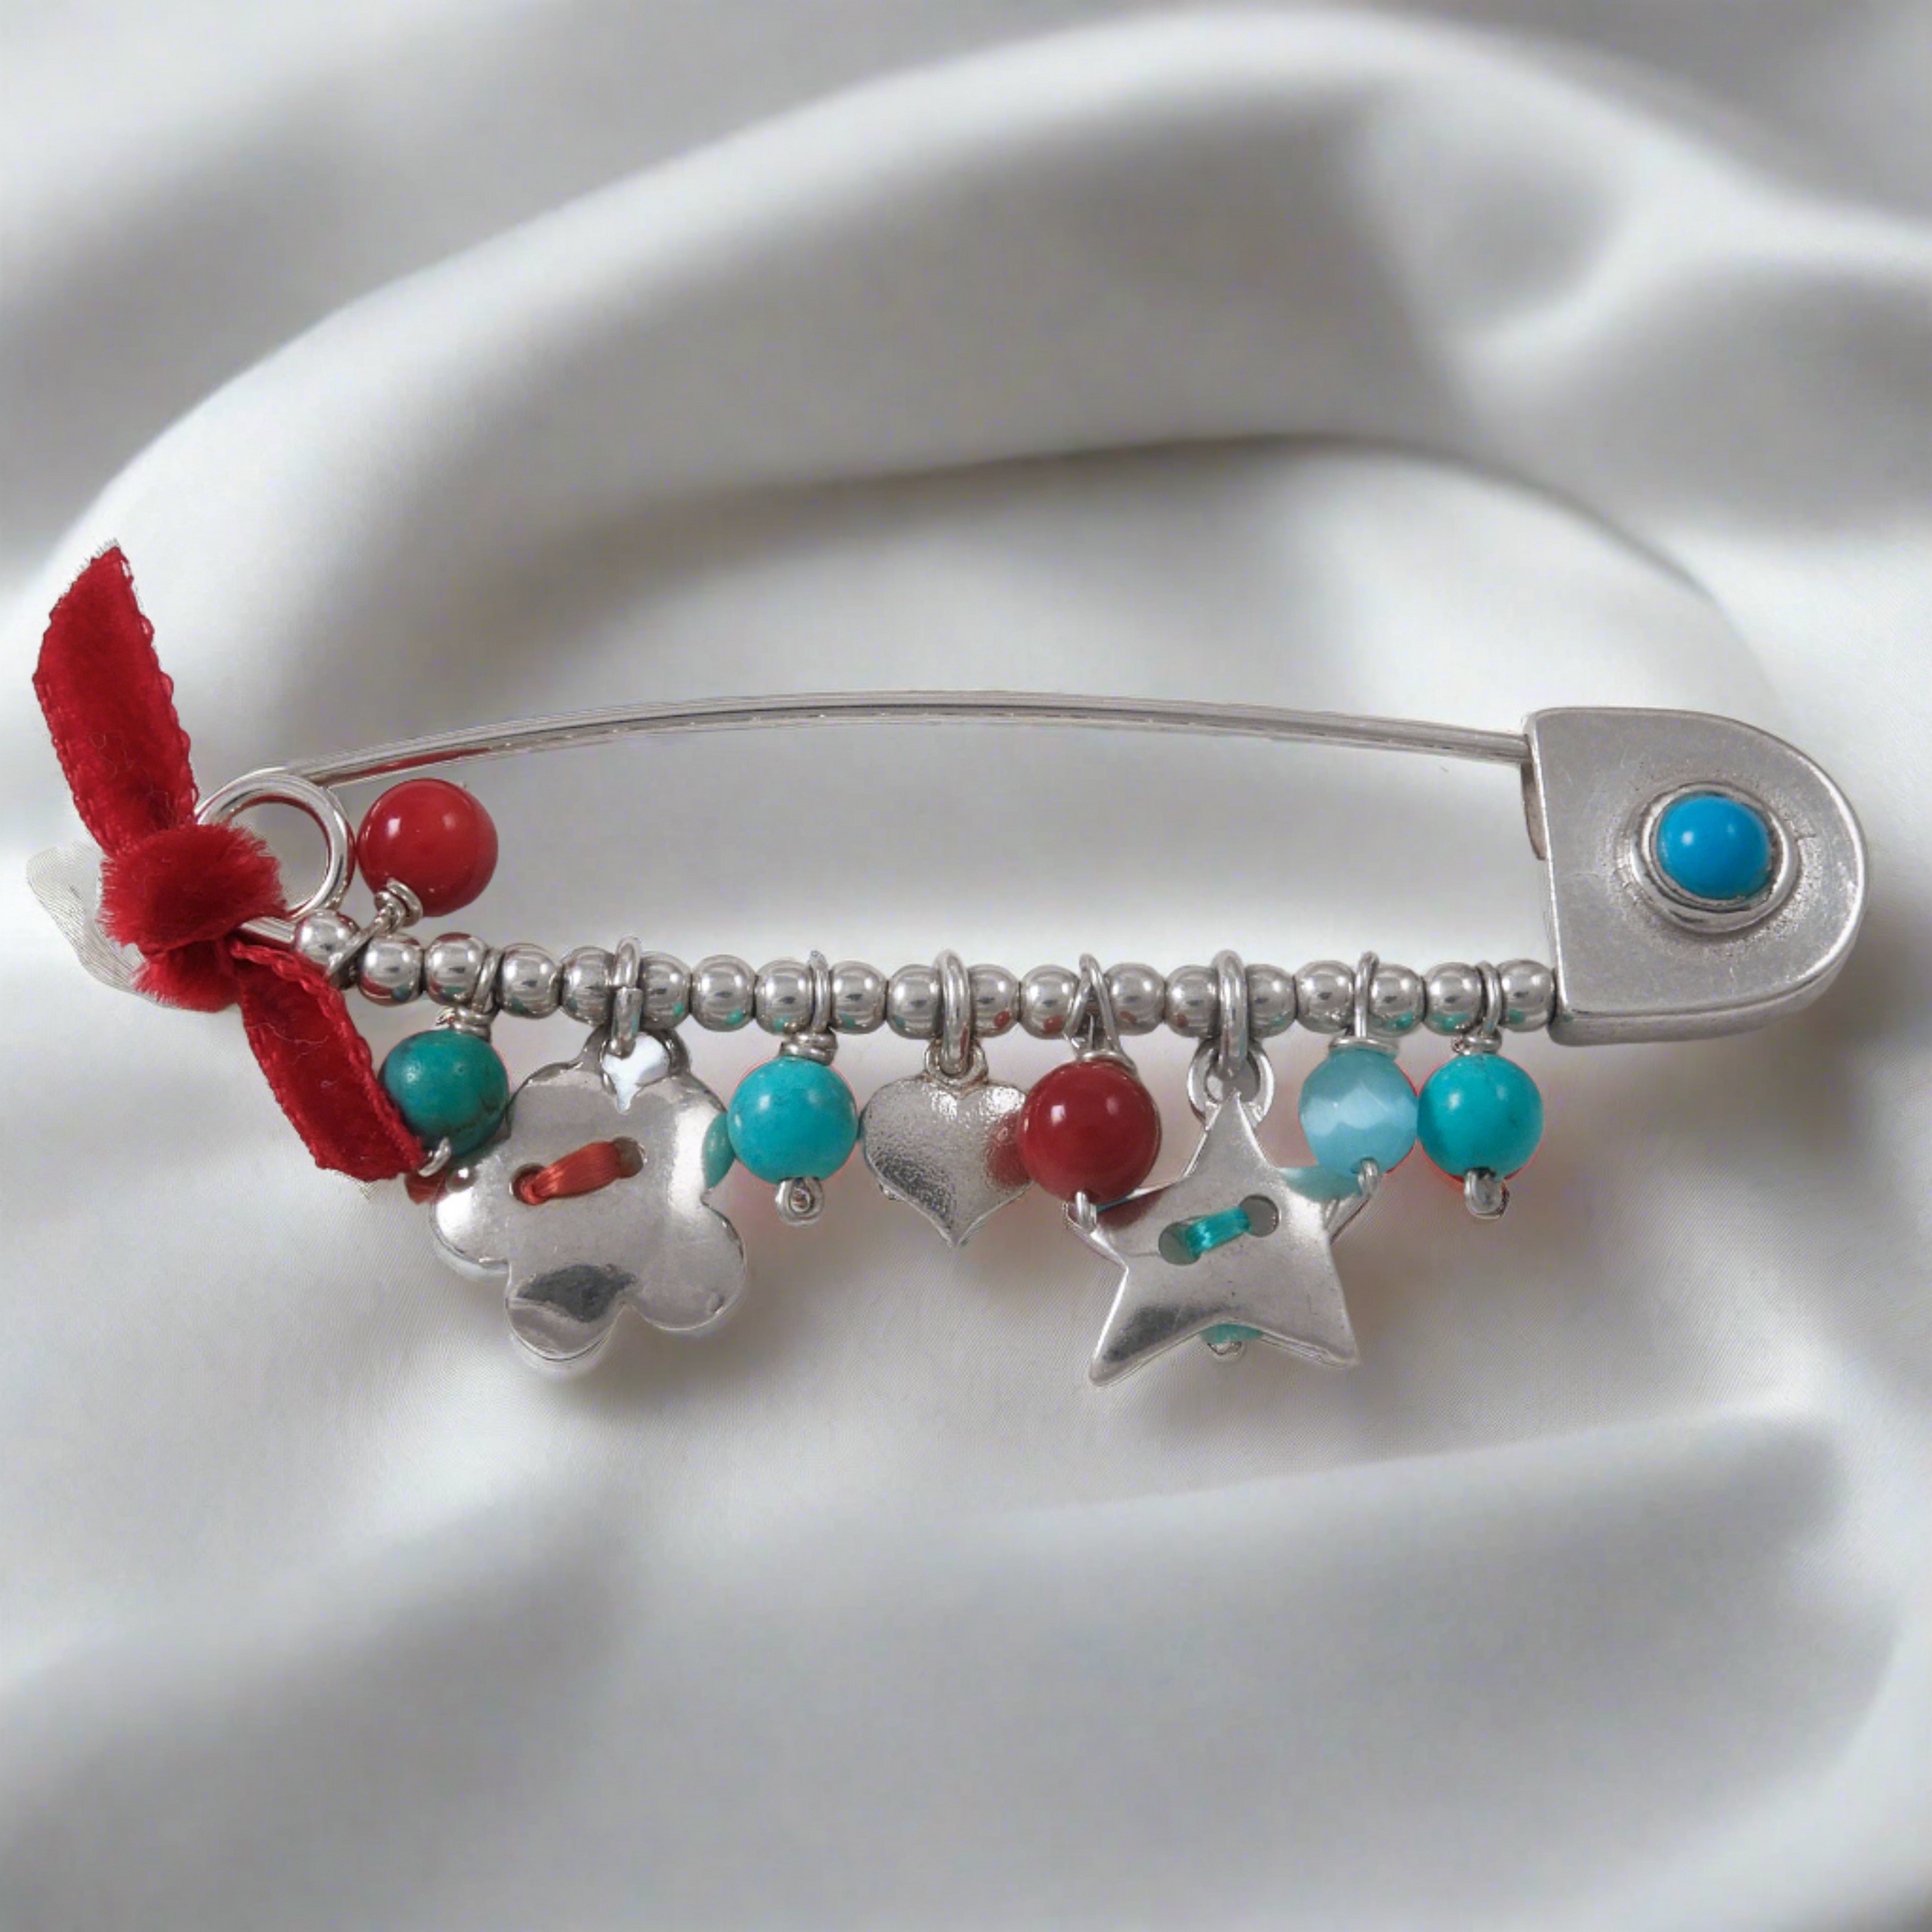 Handmade sterling silver brooch with turqoise and corals beads,  a heart , a flower and a star